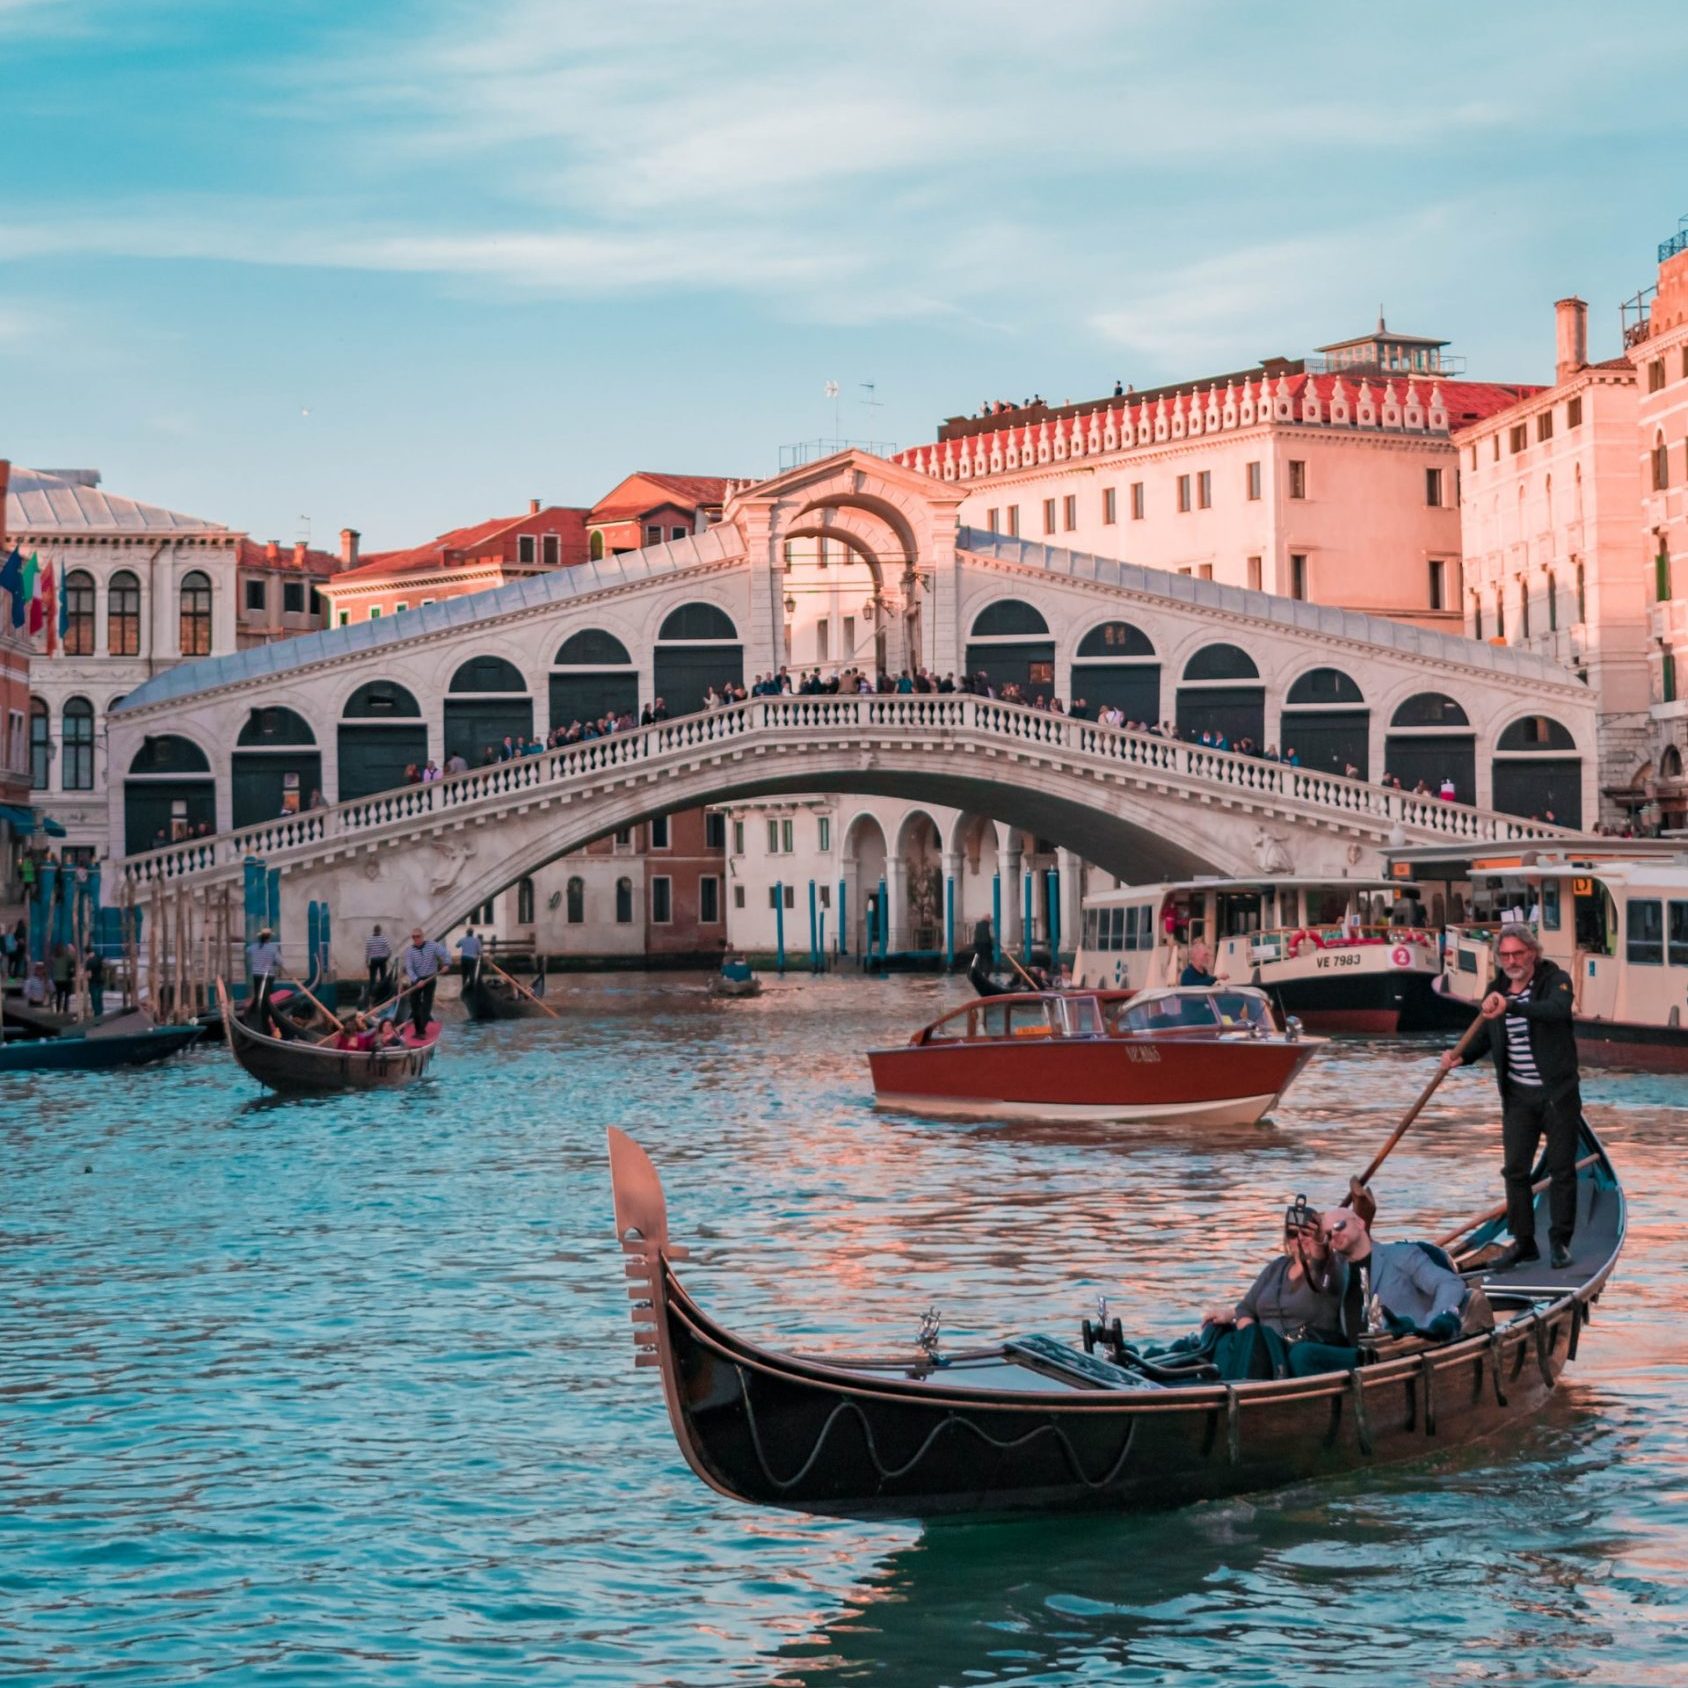 Venice, one of the best destinations for houseboat vacations in Europe.